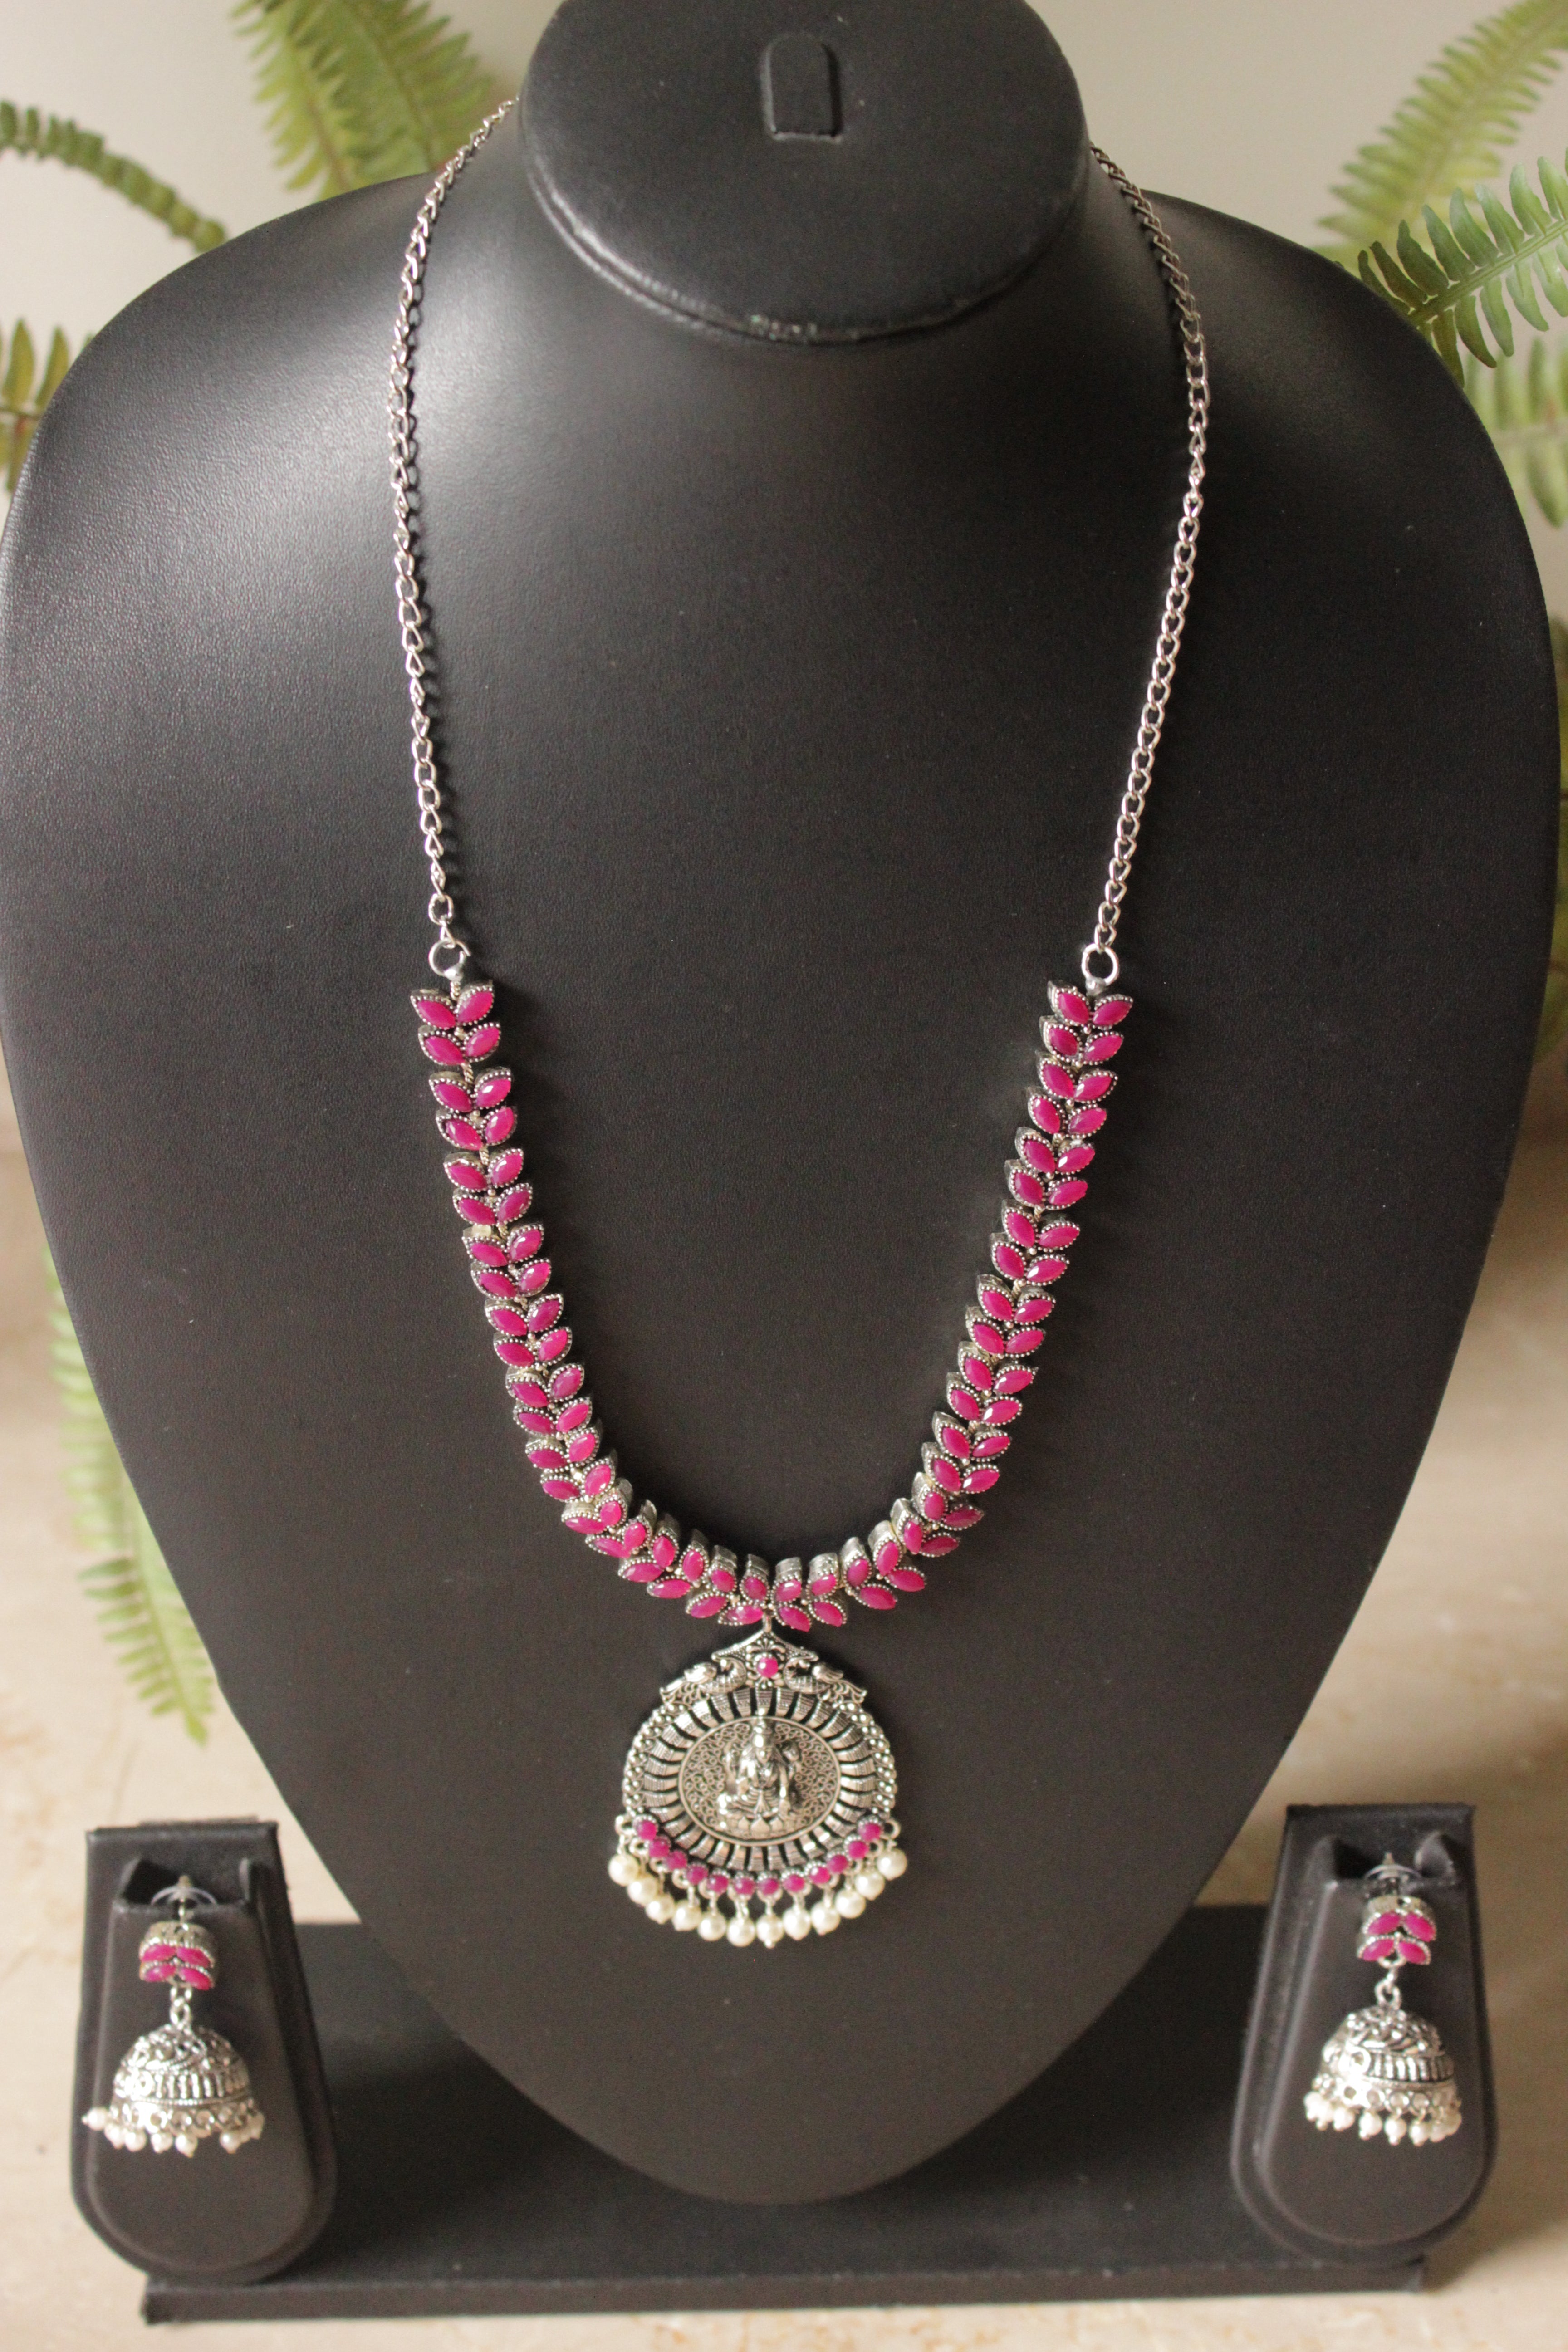 Fuchsia Glass Stones Embedded Religious Motif Adjustable Length Metal Necklace Set with Jhumka Earrings